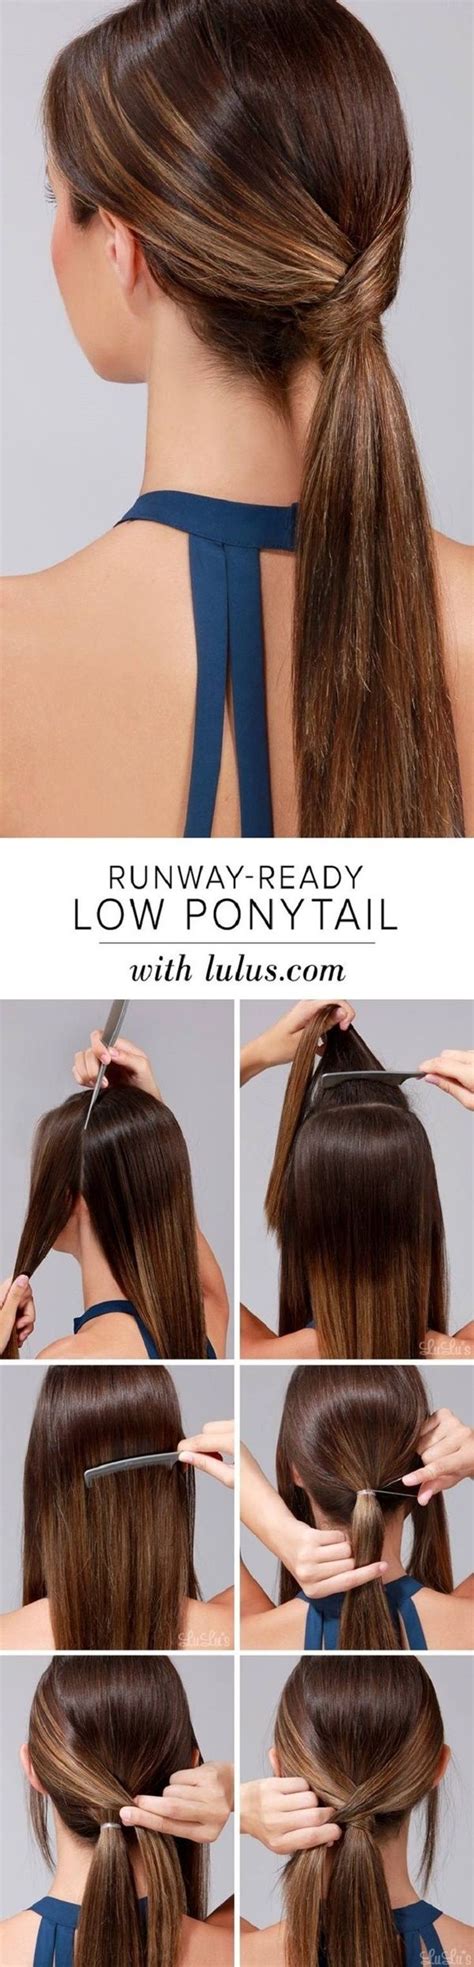 Easy Hairstyles For Girls 41 Diy Cool Easy Hairstyles That Real